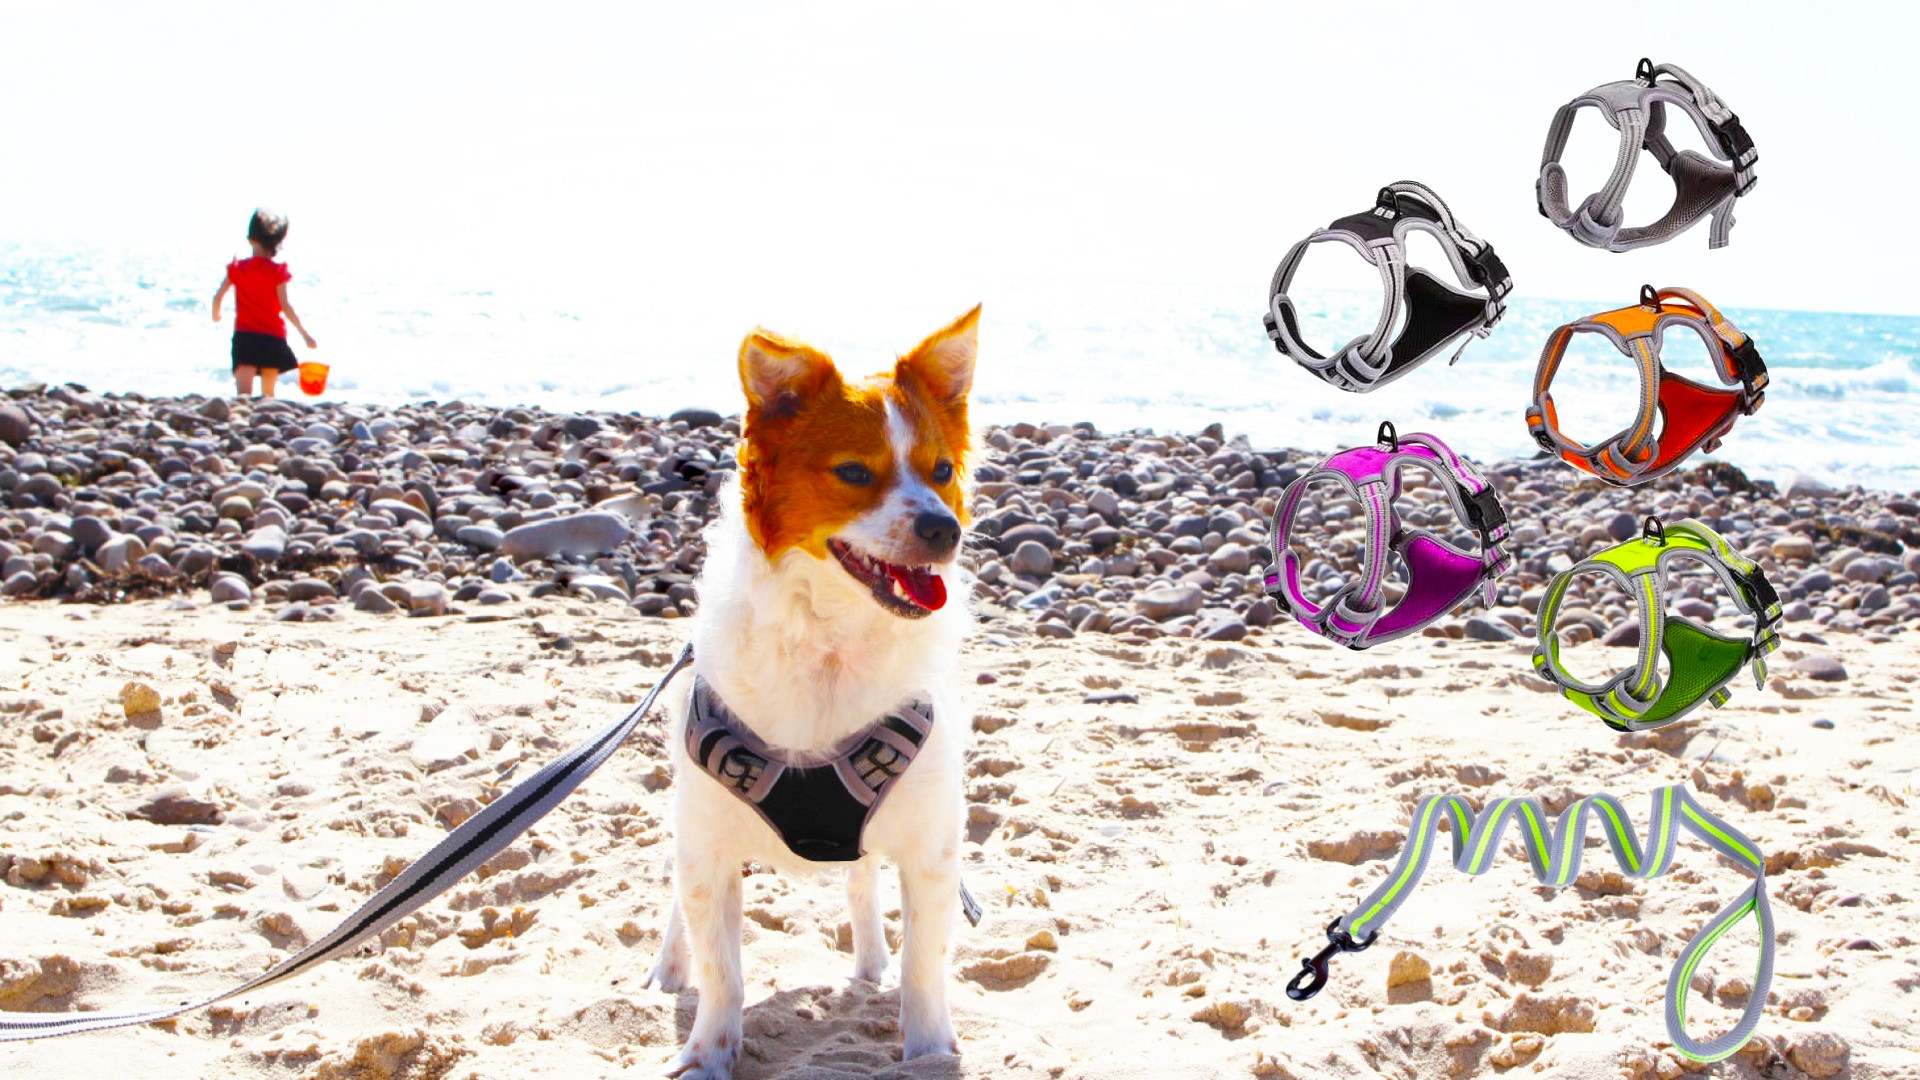 Beach scene with dog wearing the deluxe harness from RubyPet, and graphic showing products.